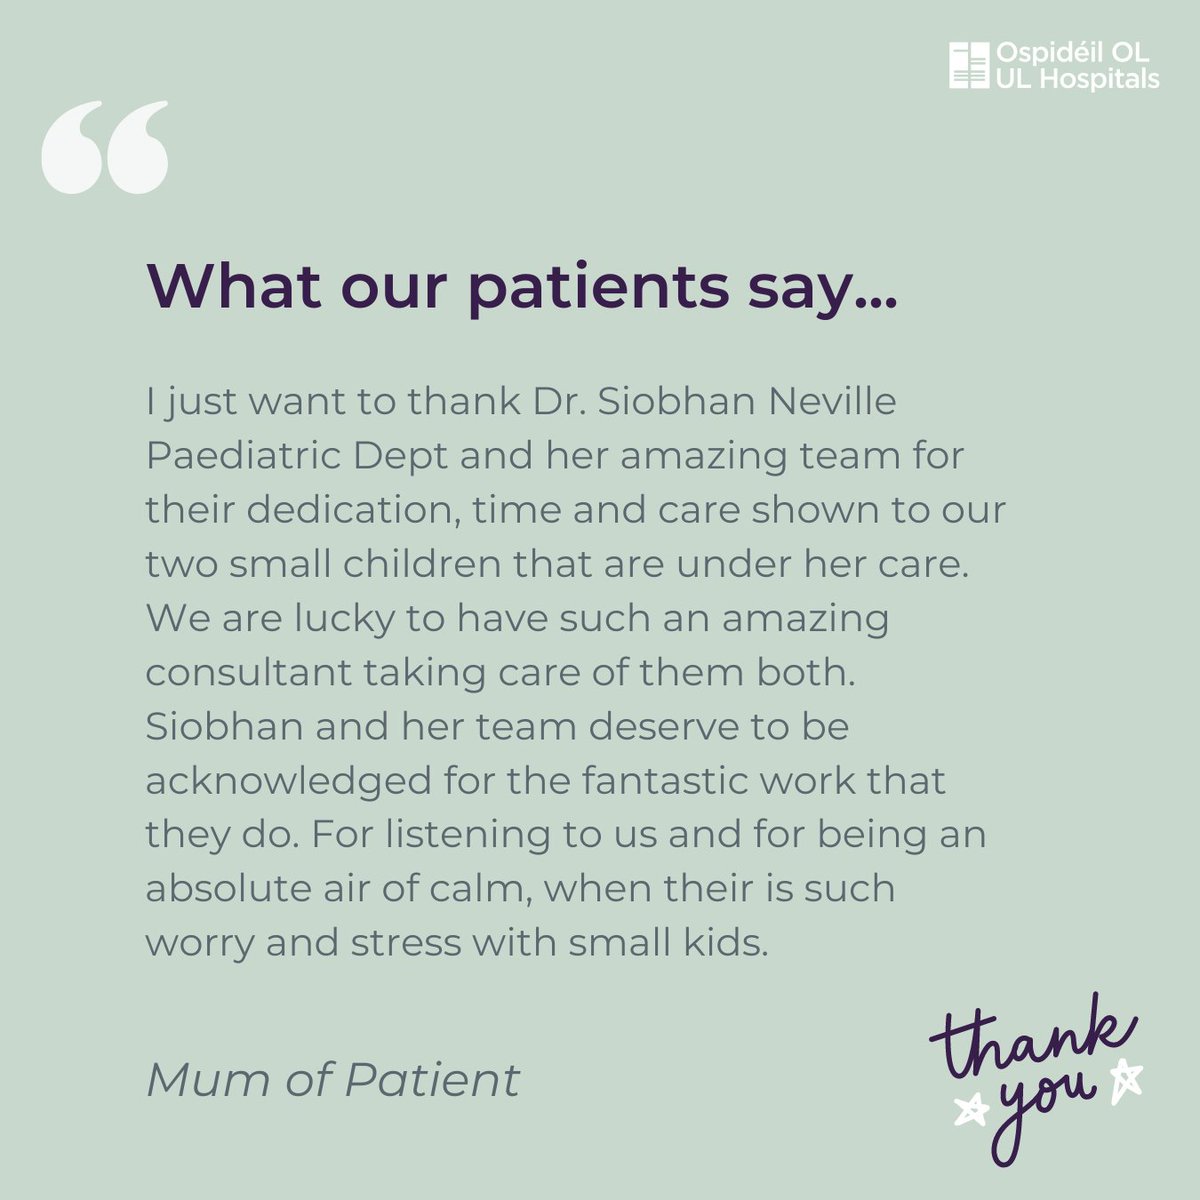 Today we share a compliment for Dr. Siobhan Neville & team at the Children's Ark Paediatric unit at UHL. Thank you to the teams across our hospitals who make patients feel welcome and supported with each visit. #OurPeopleOurServices #TeamULHG